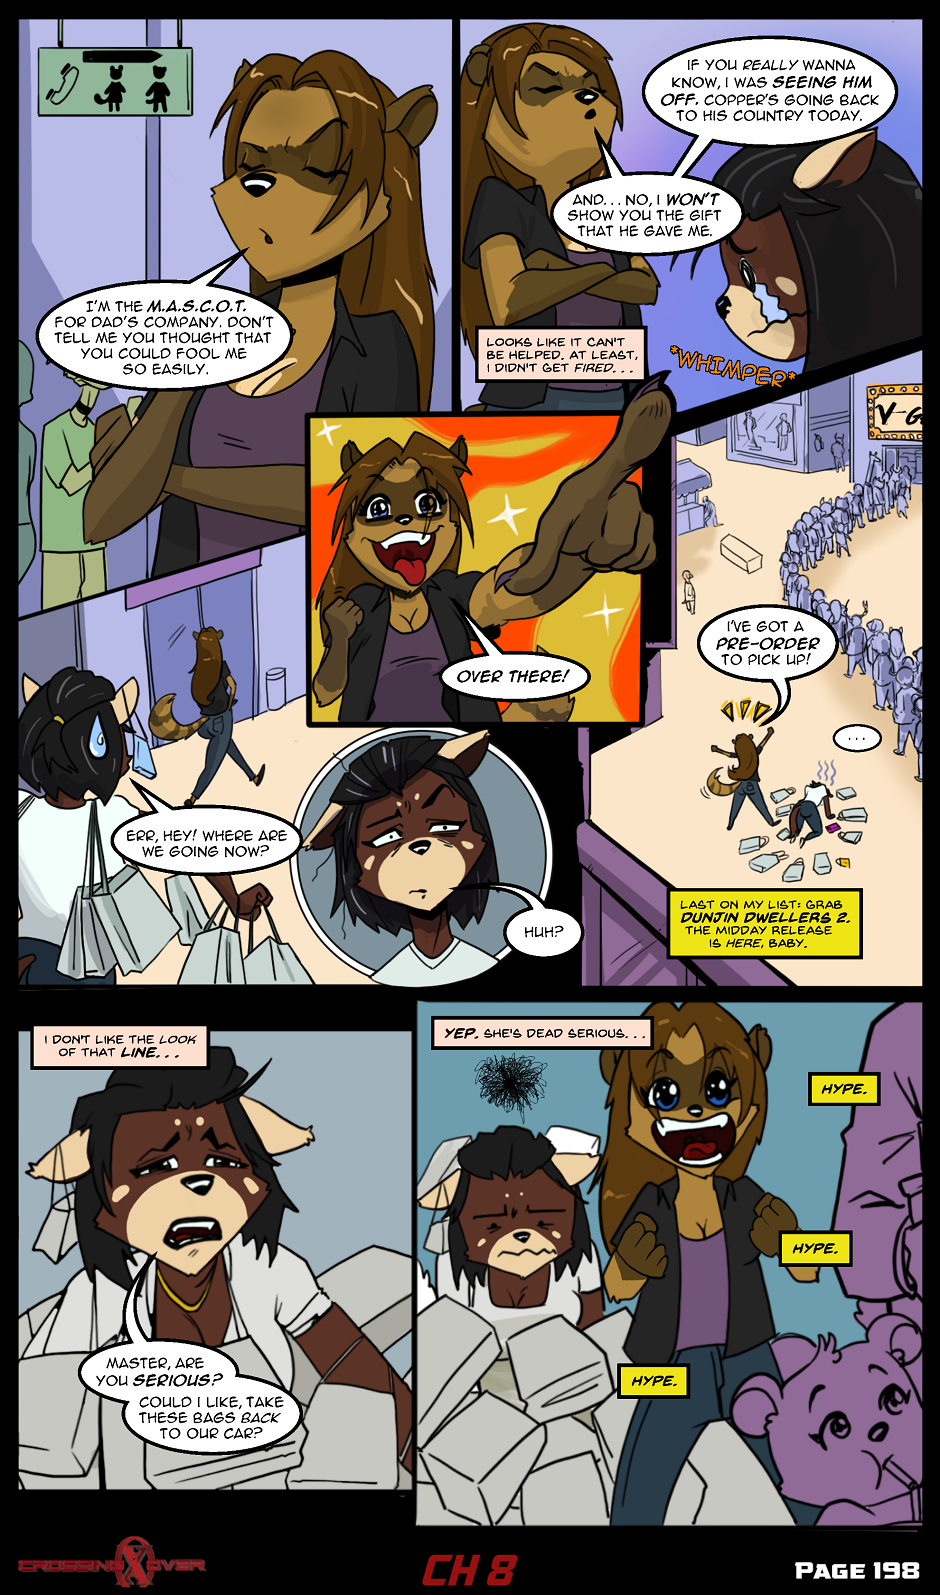 Page 198 (Ch 8)